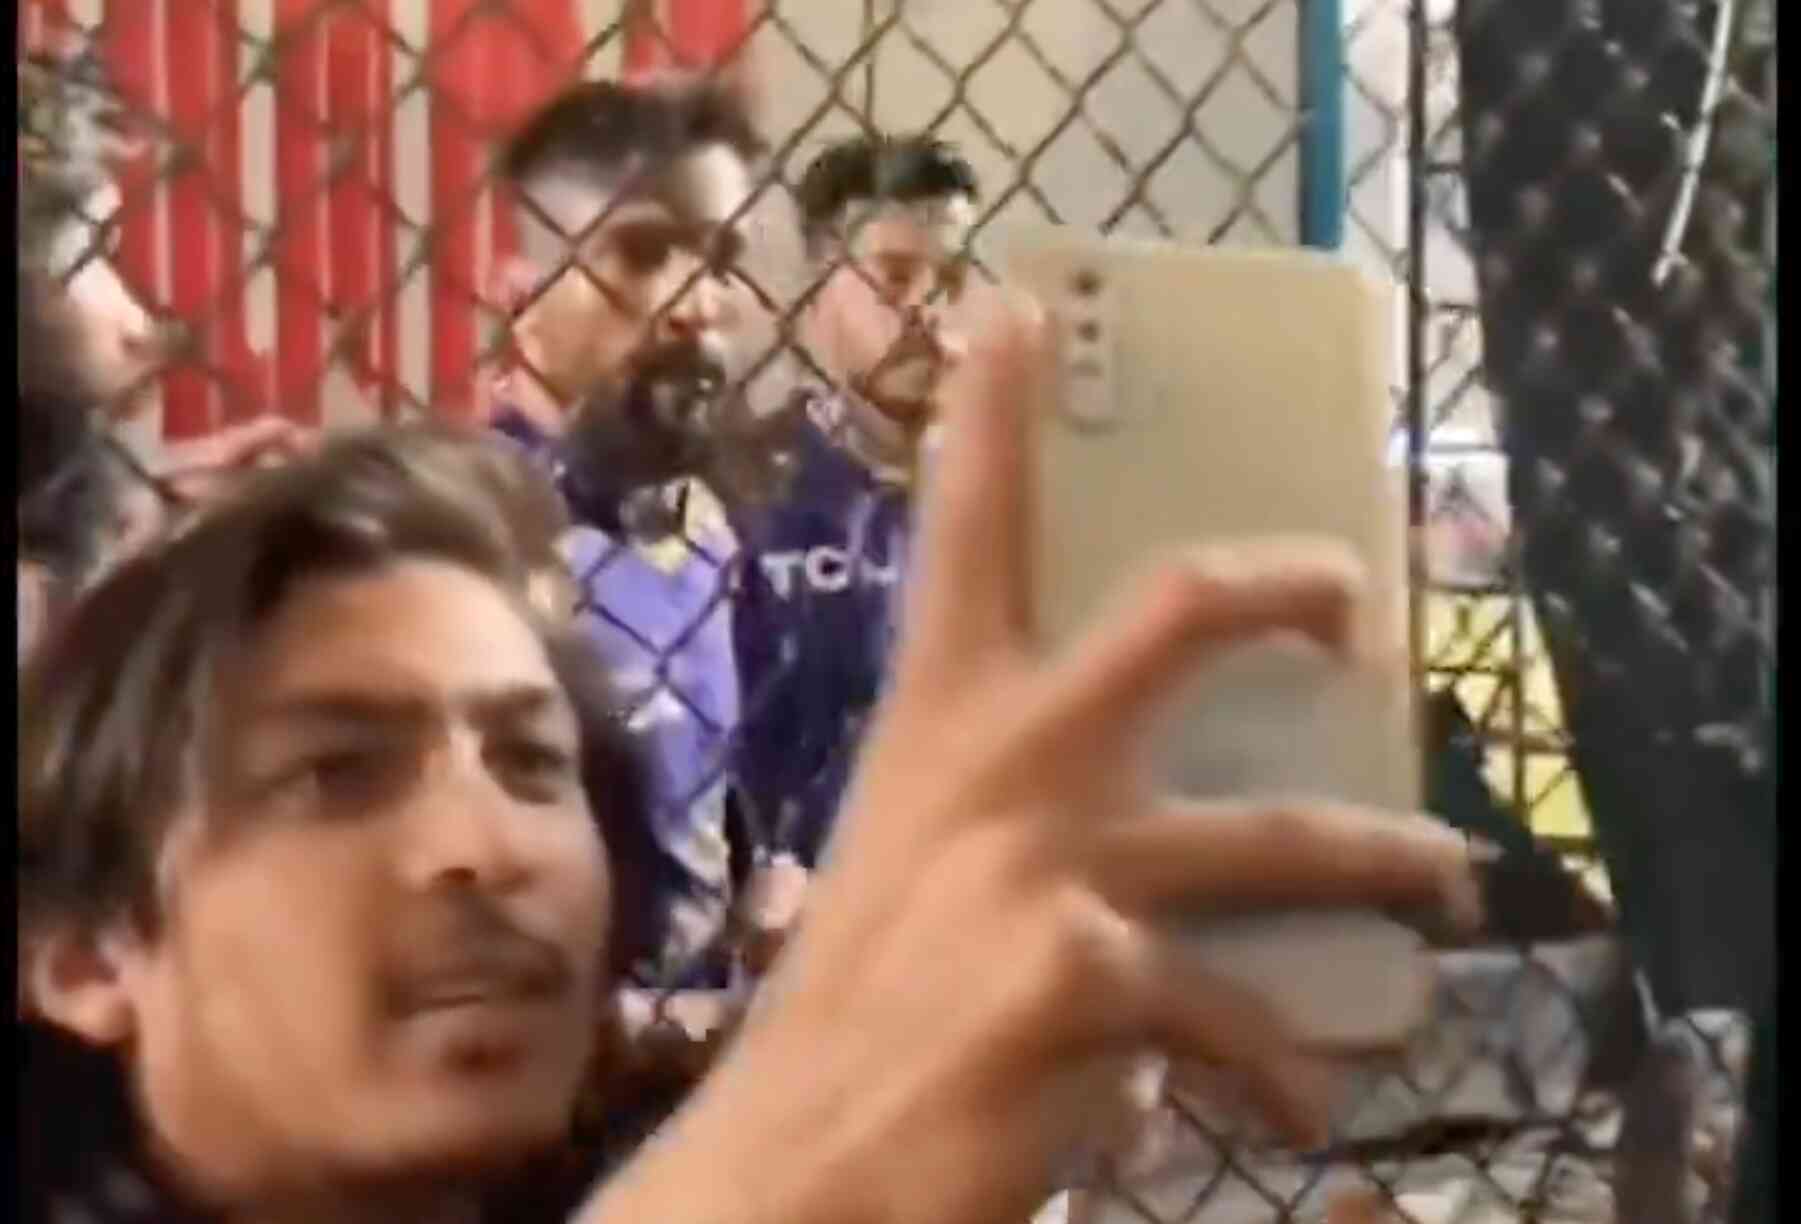 Mohammad Amir fighting with a fan (X.com